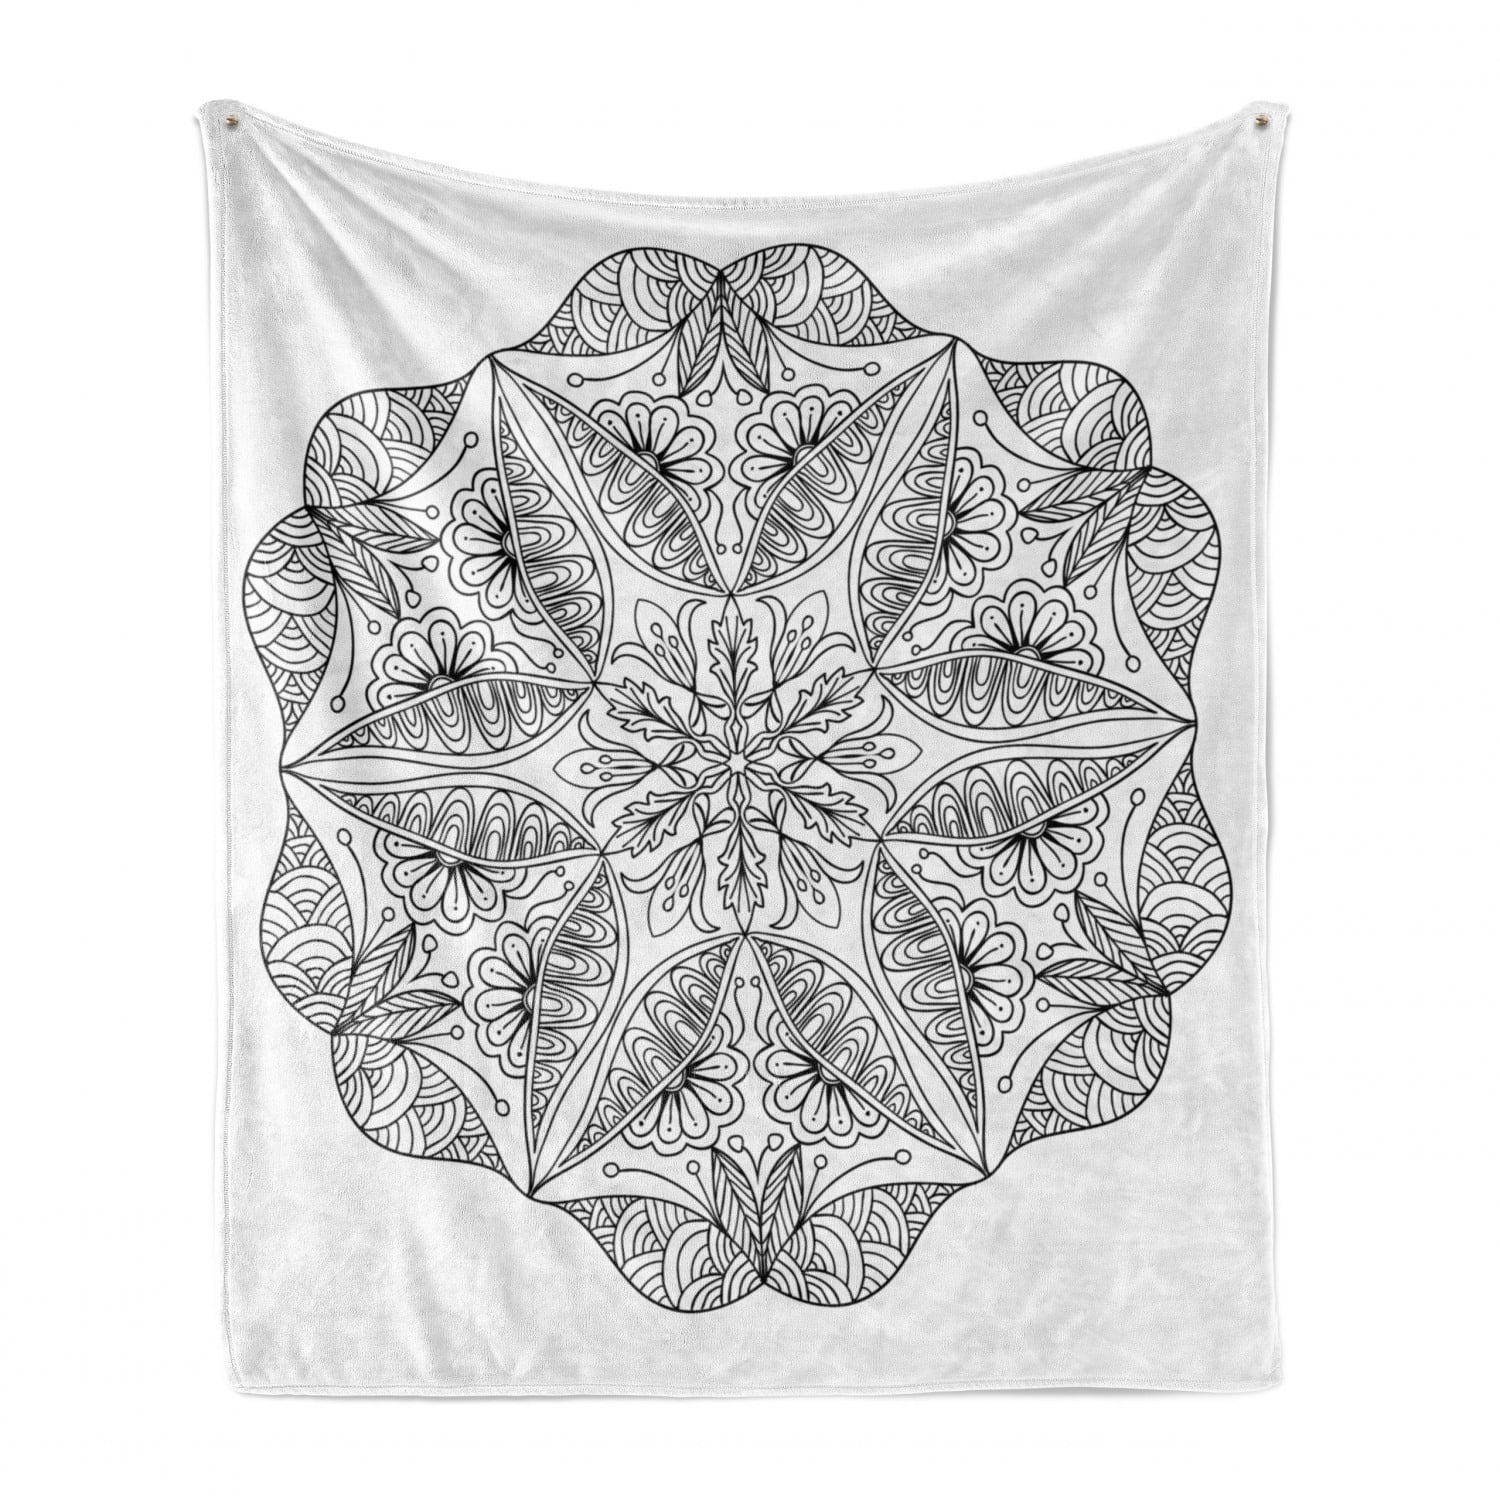 60 x 80 Cozy Plush for Indoor and Outdoor Use Grey Black Mandala with Aztec Tribal Textured Ornamental Cosmos Floral Pattern Ambesonne Lotus Soft Flannel Fleece Throw Blanket 